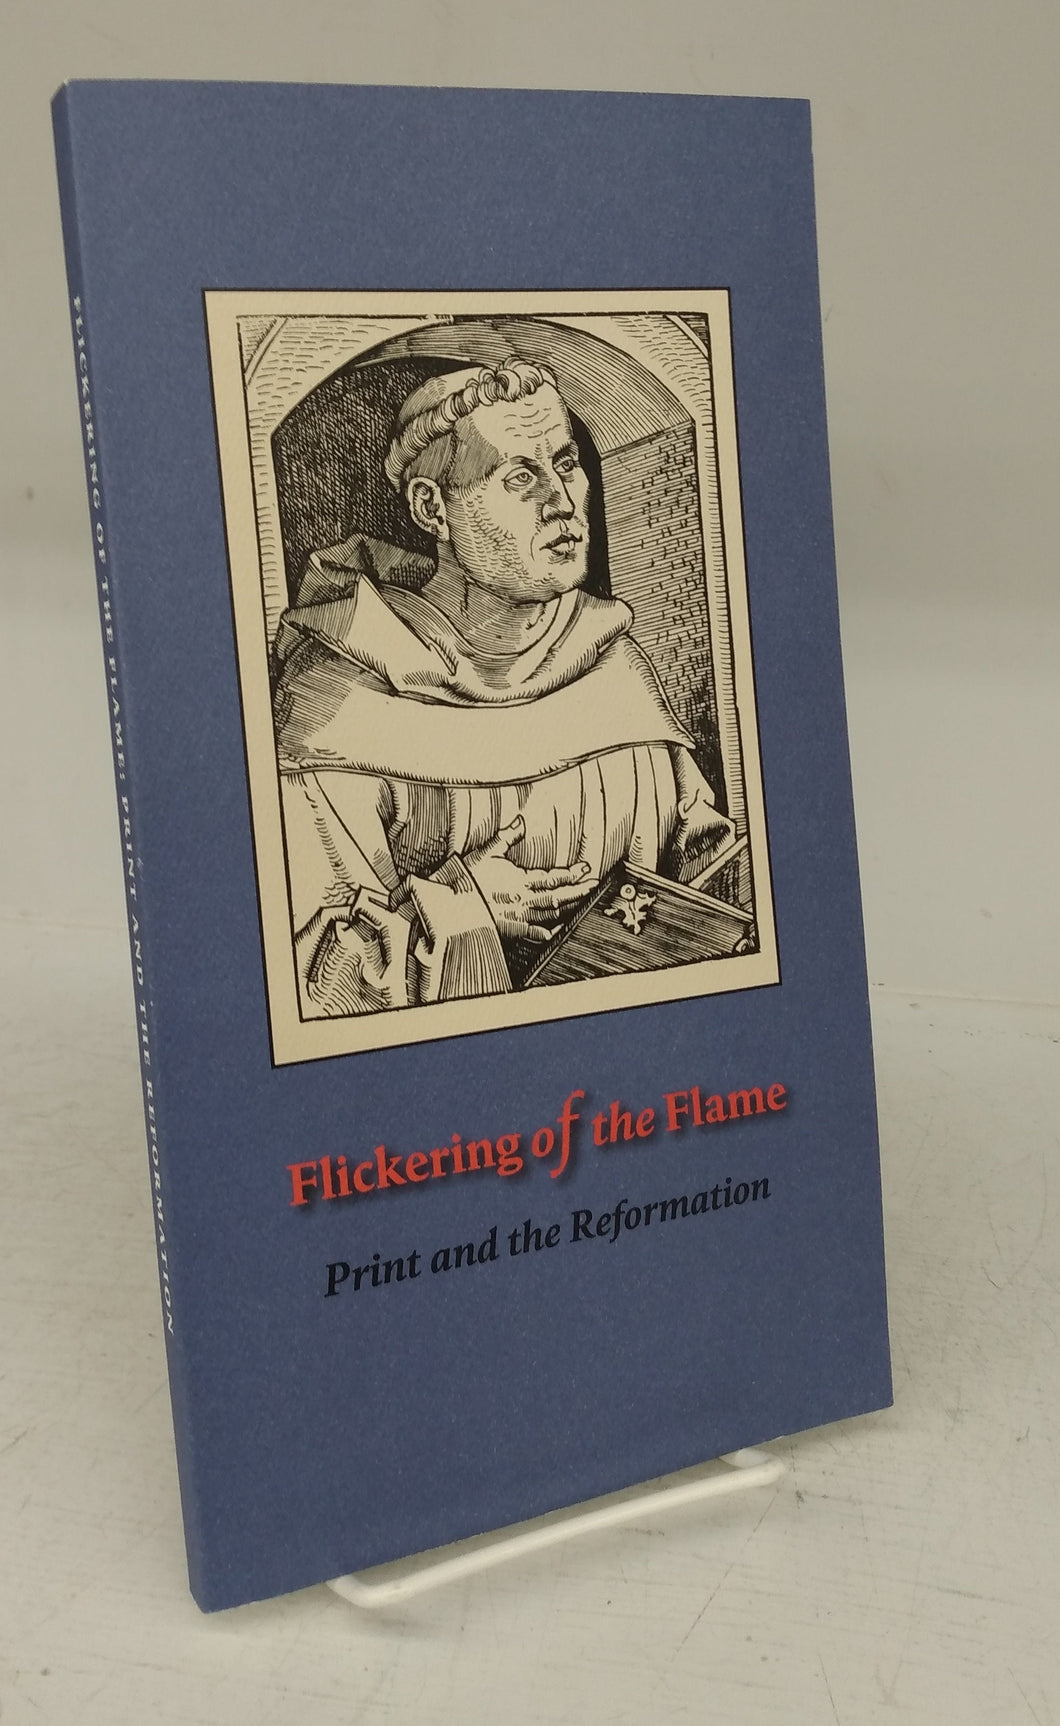 Flickering of the Flame: Print and the Reformation